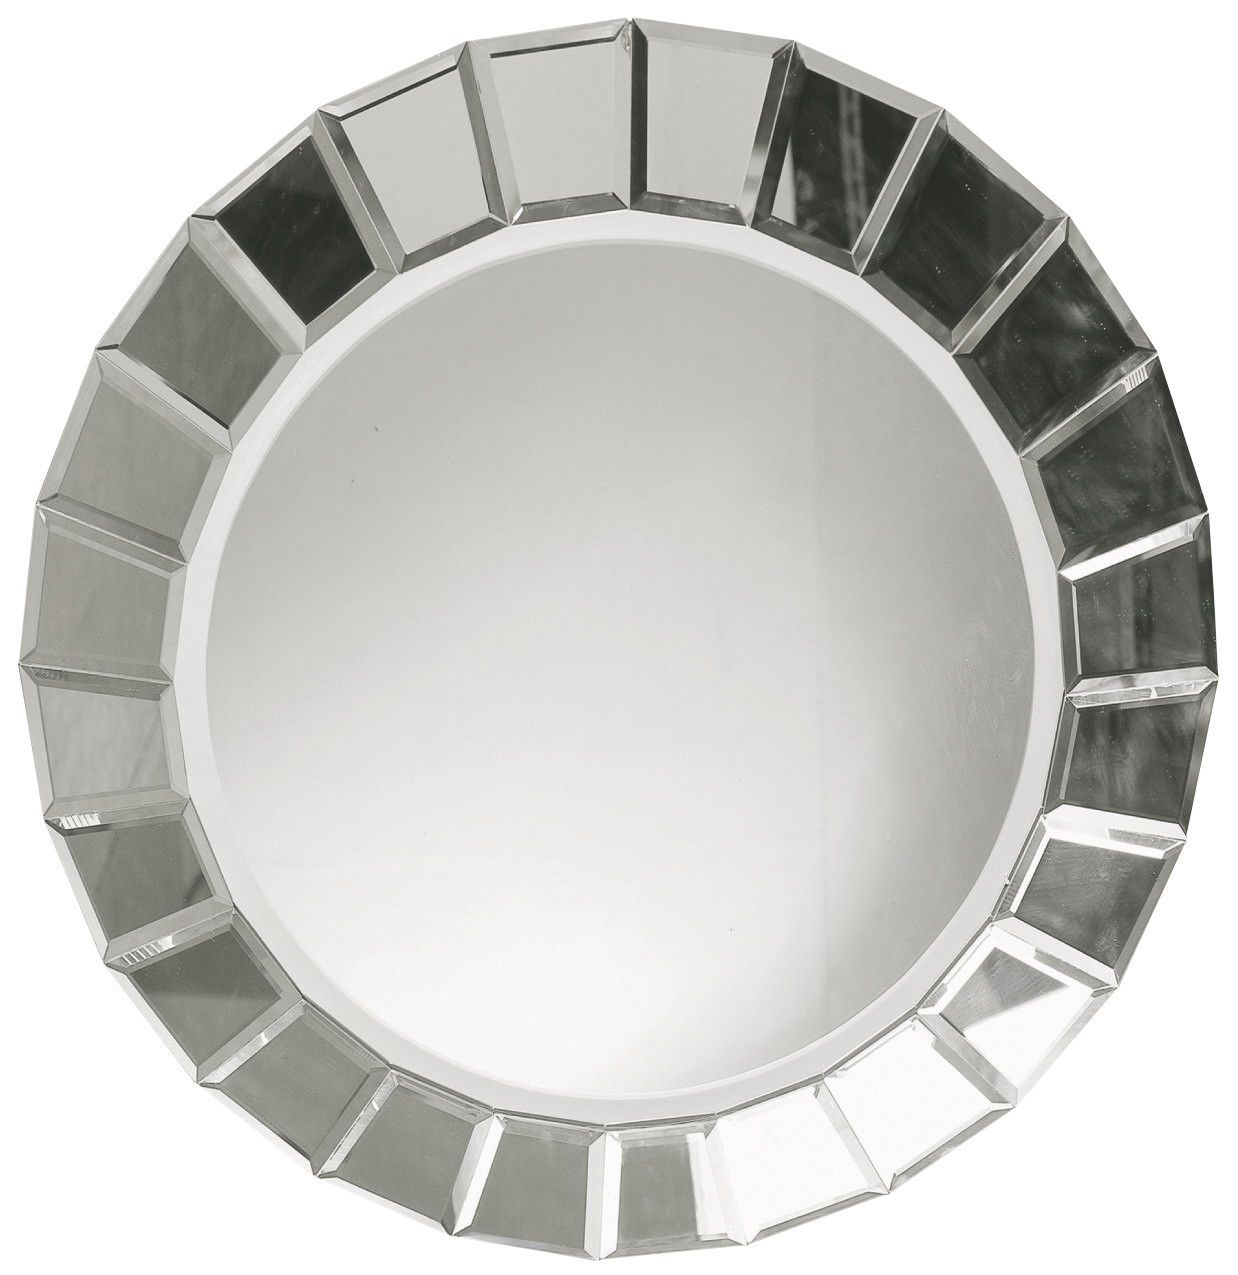 23 Fancy Decorative Mirror Designs Intended For Shildon Beveled Accent Mirrors (View 14 of 15)